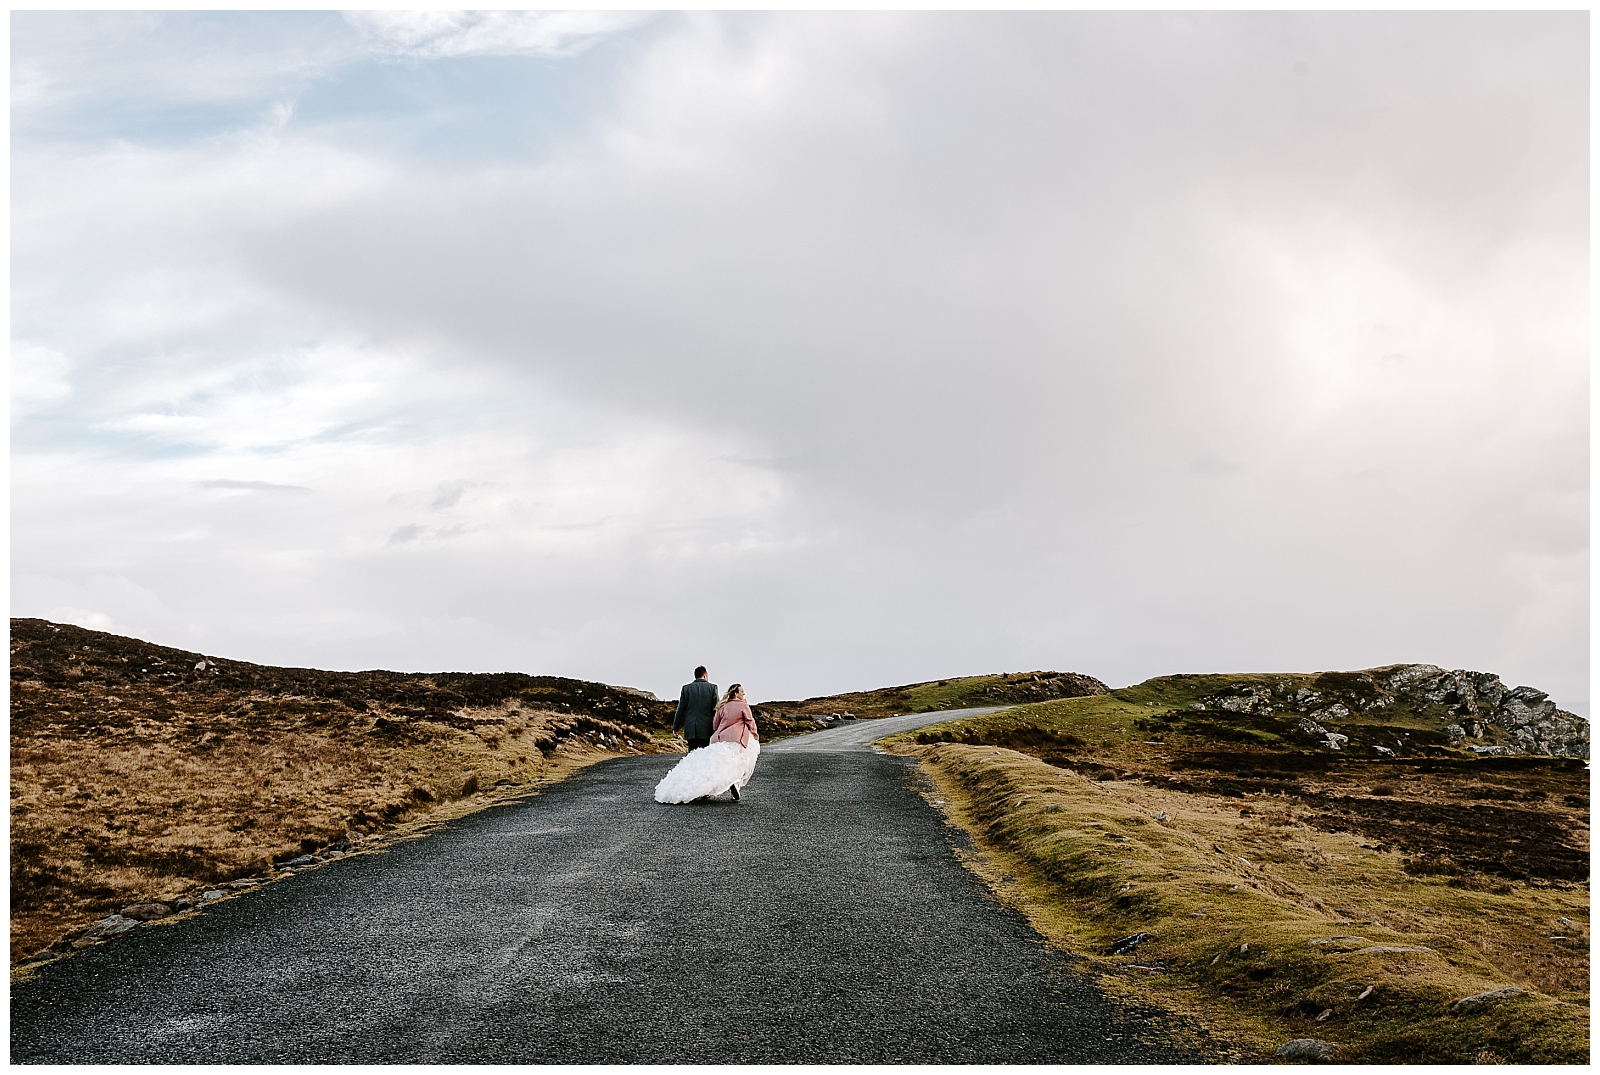 Eloping in Ireland at the beautiful cliffs